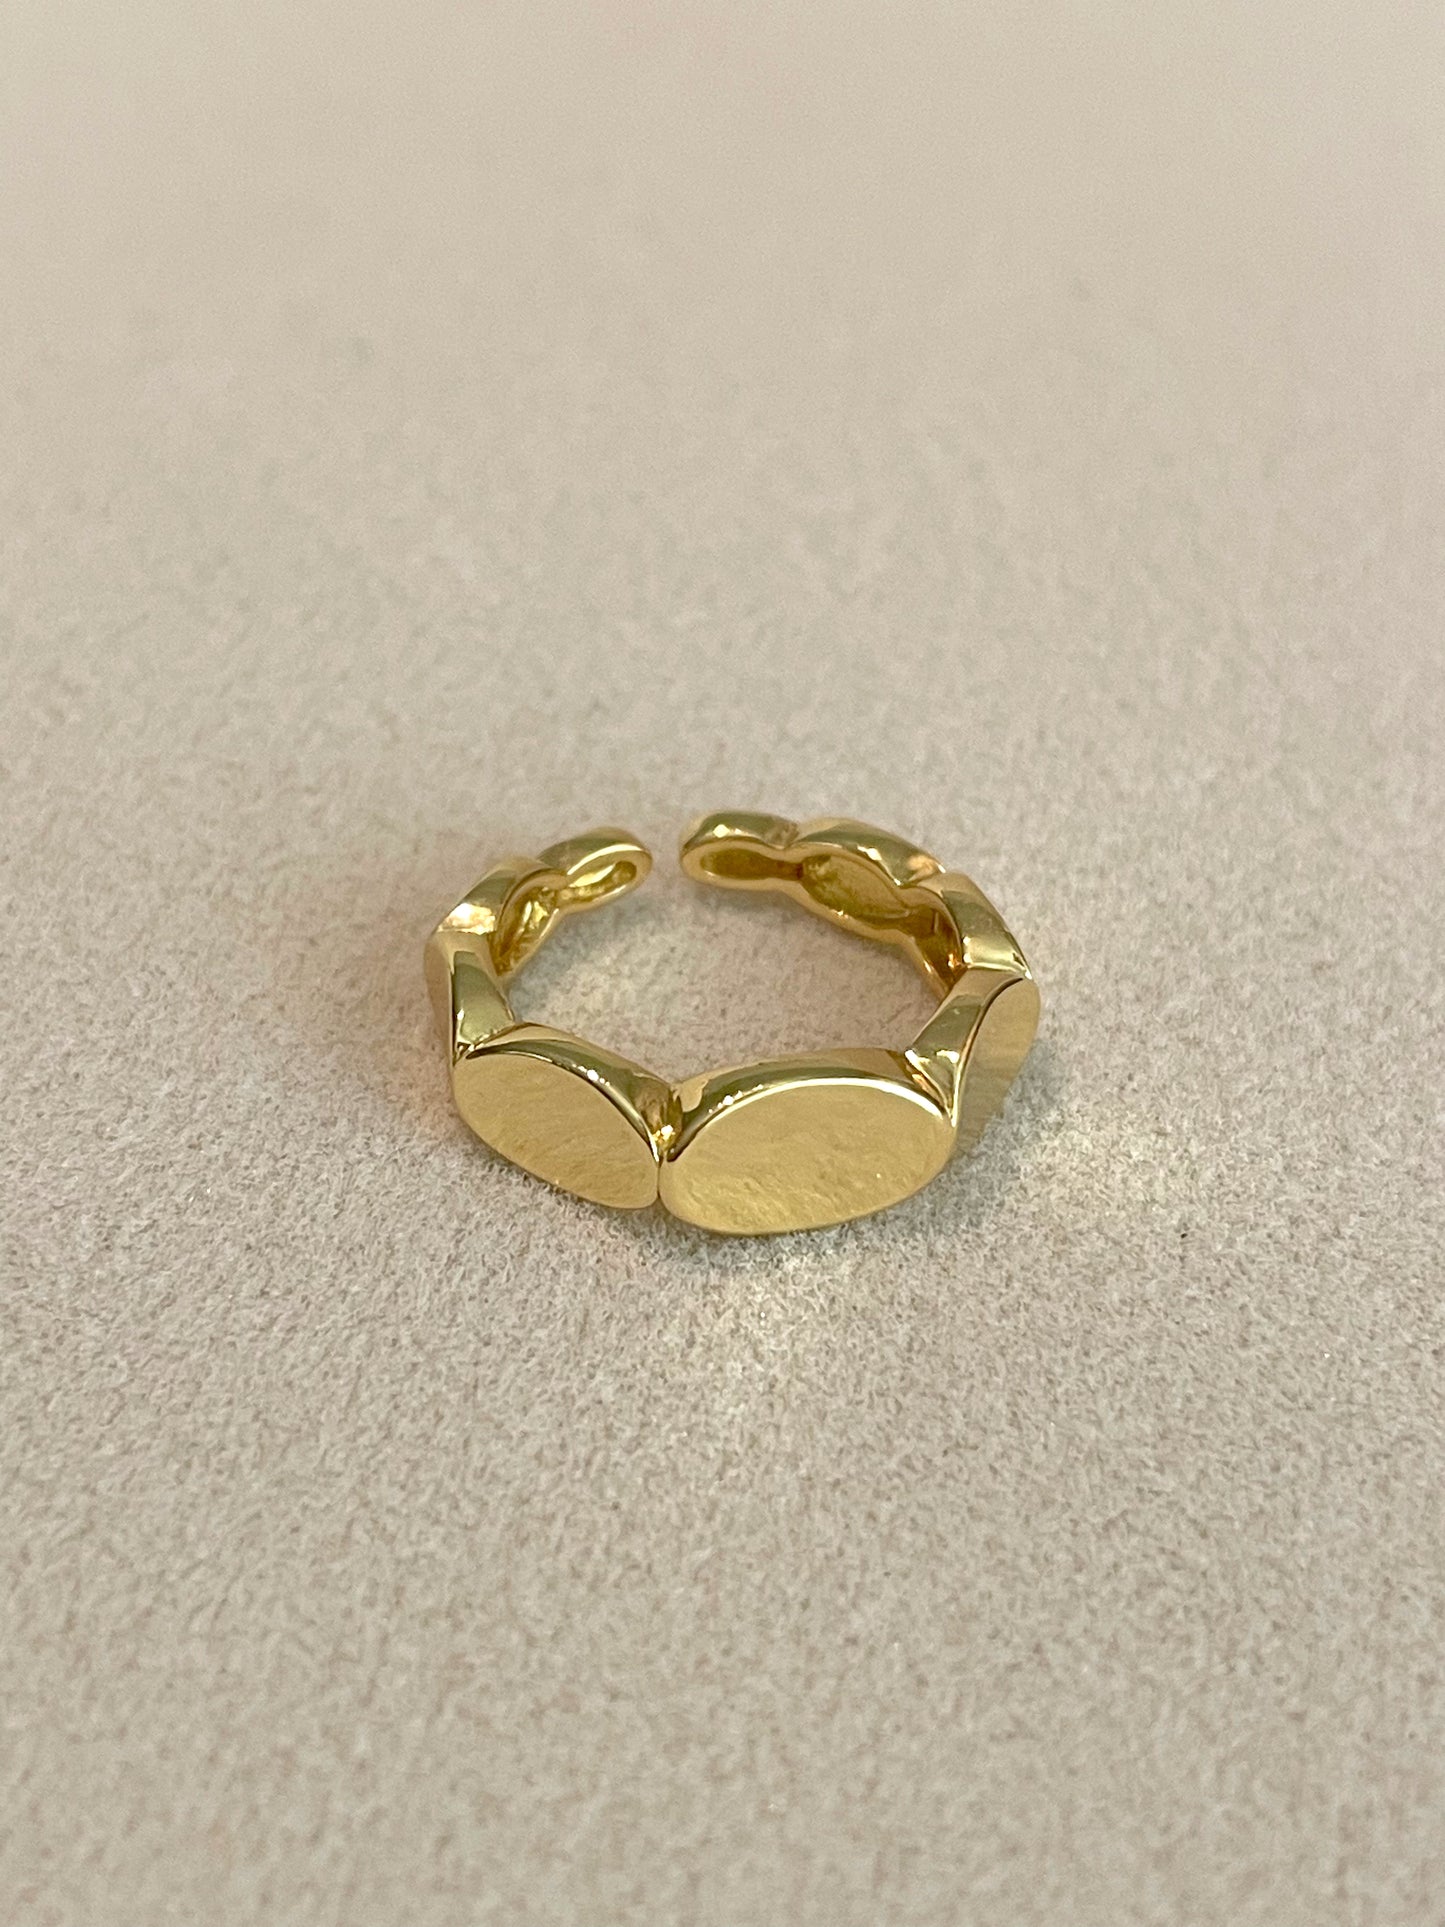 Coco gold ring